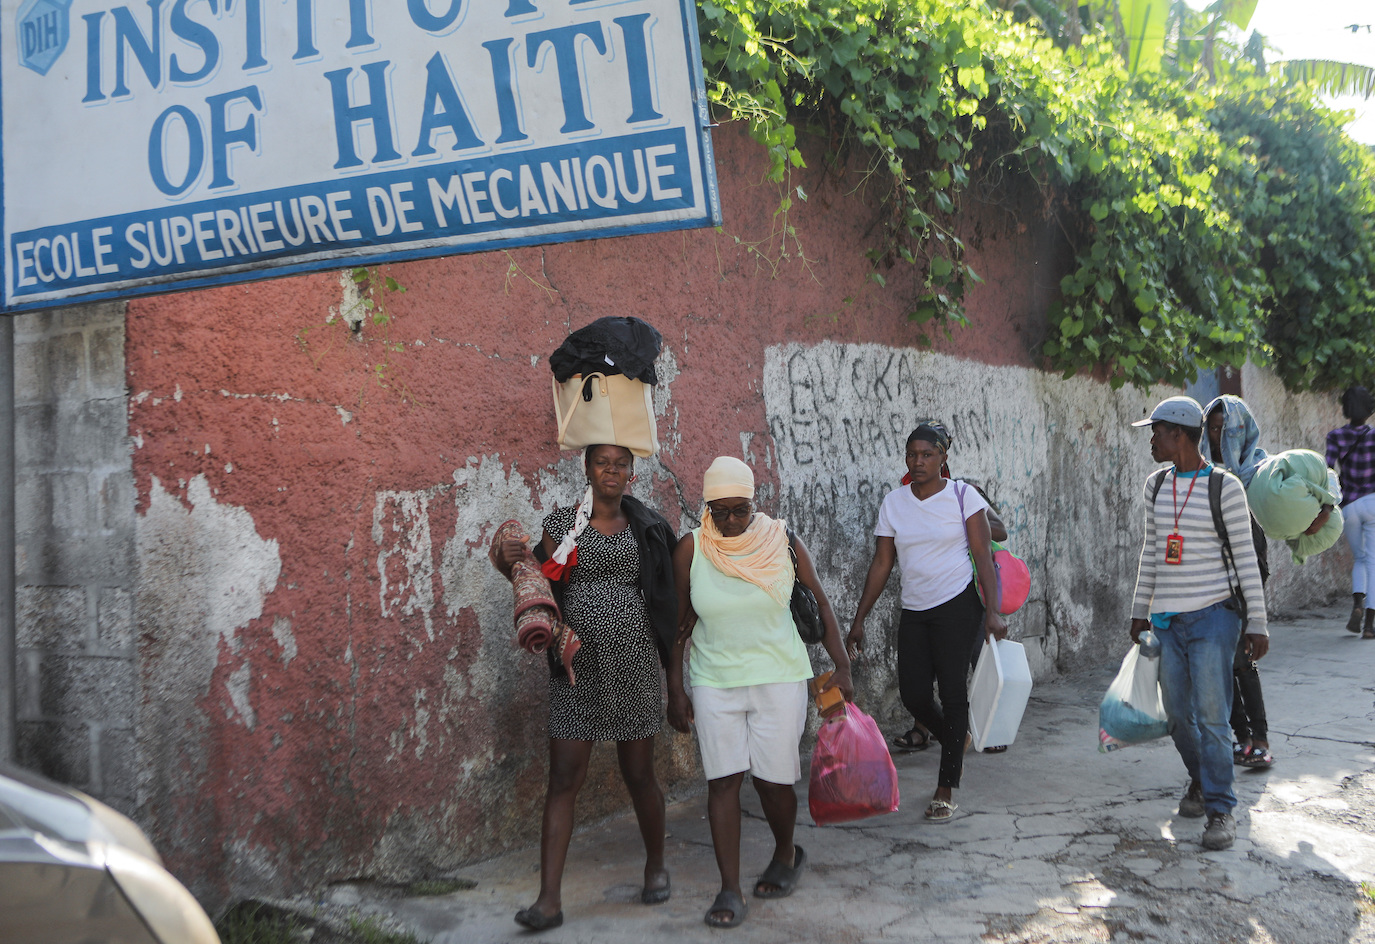 Pushed to its limit by violence, Haiti turns to the United Nations